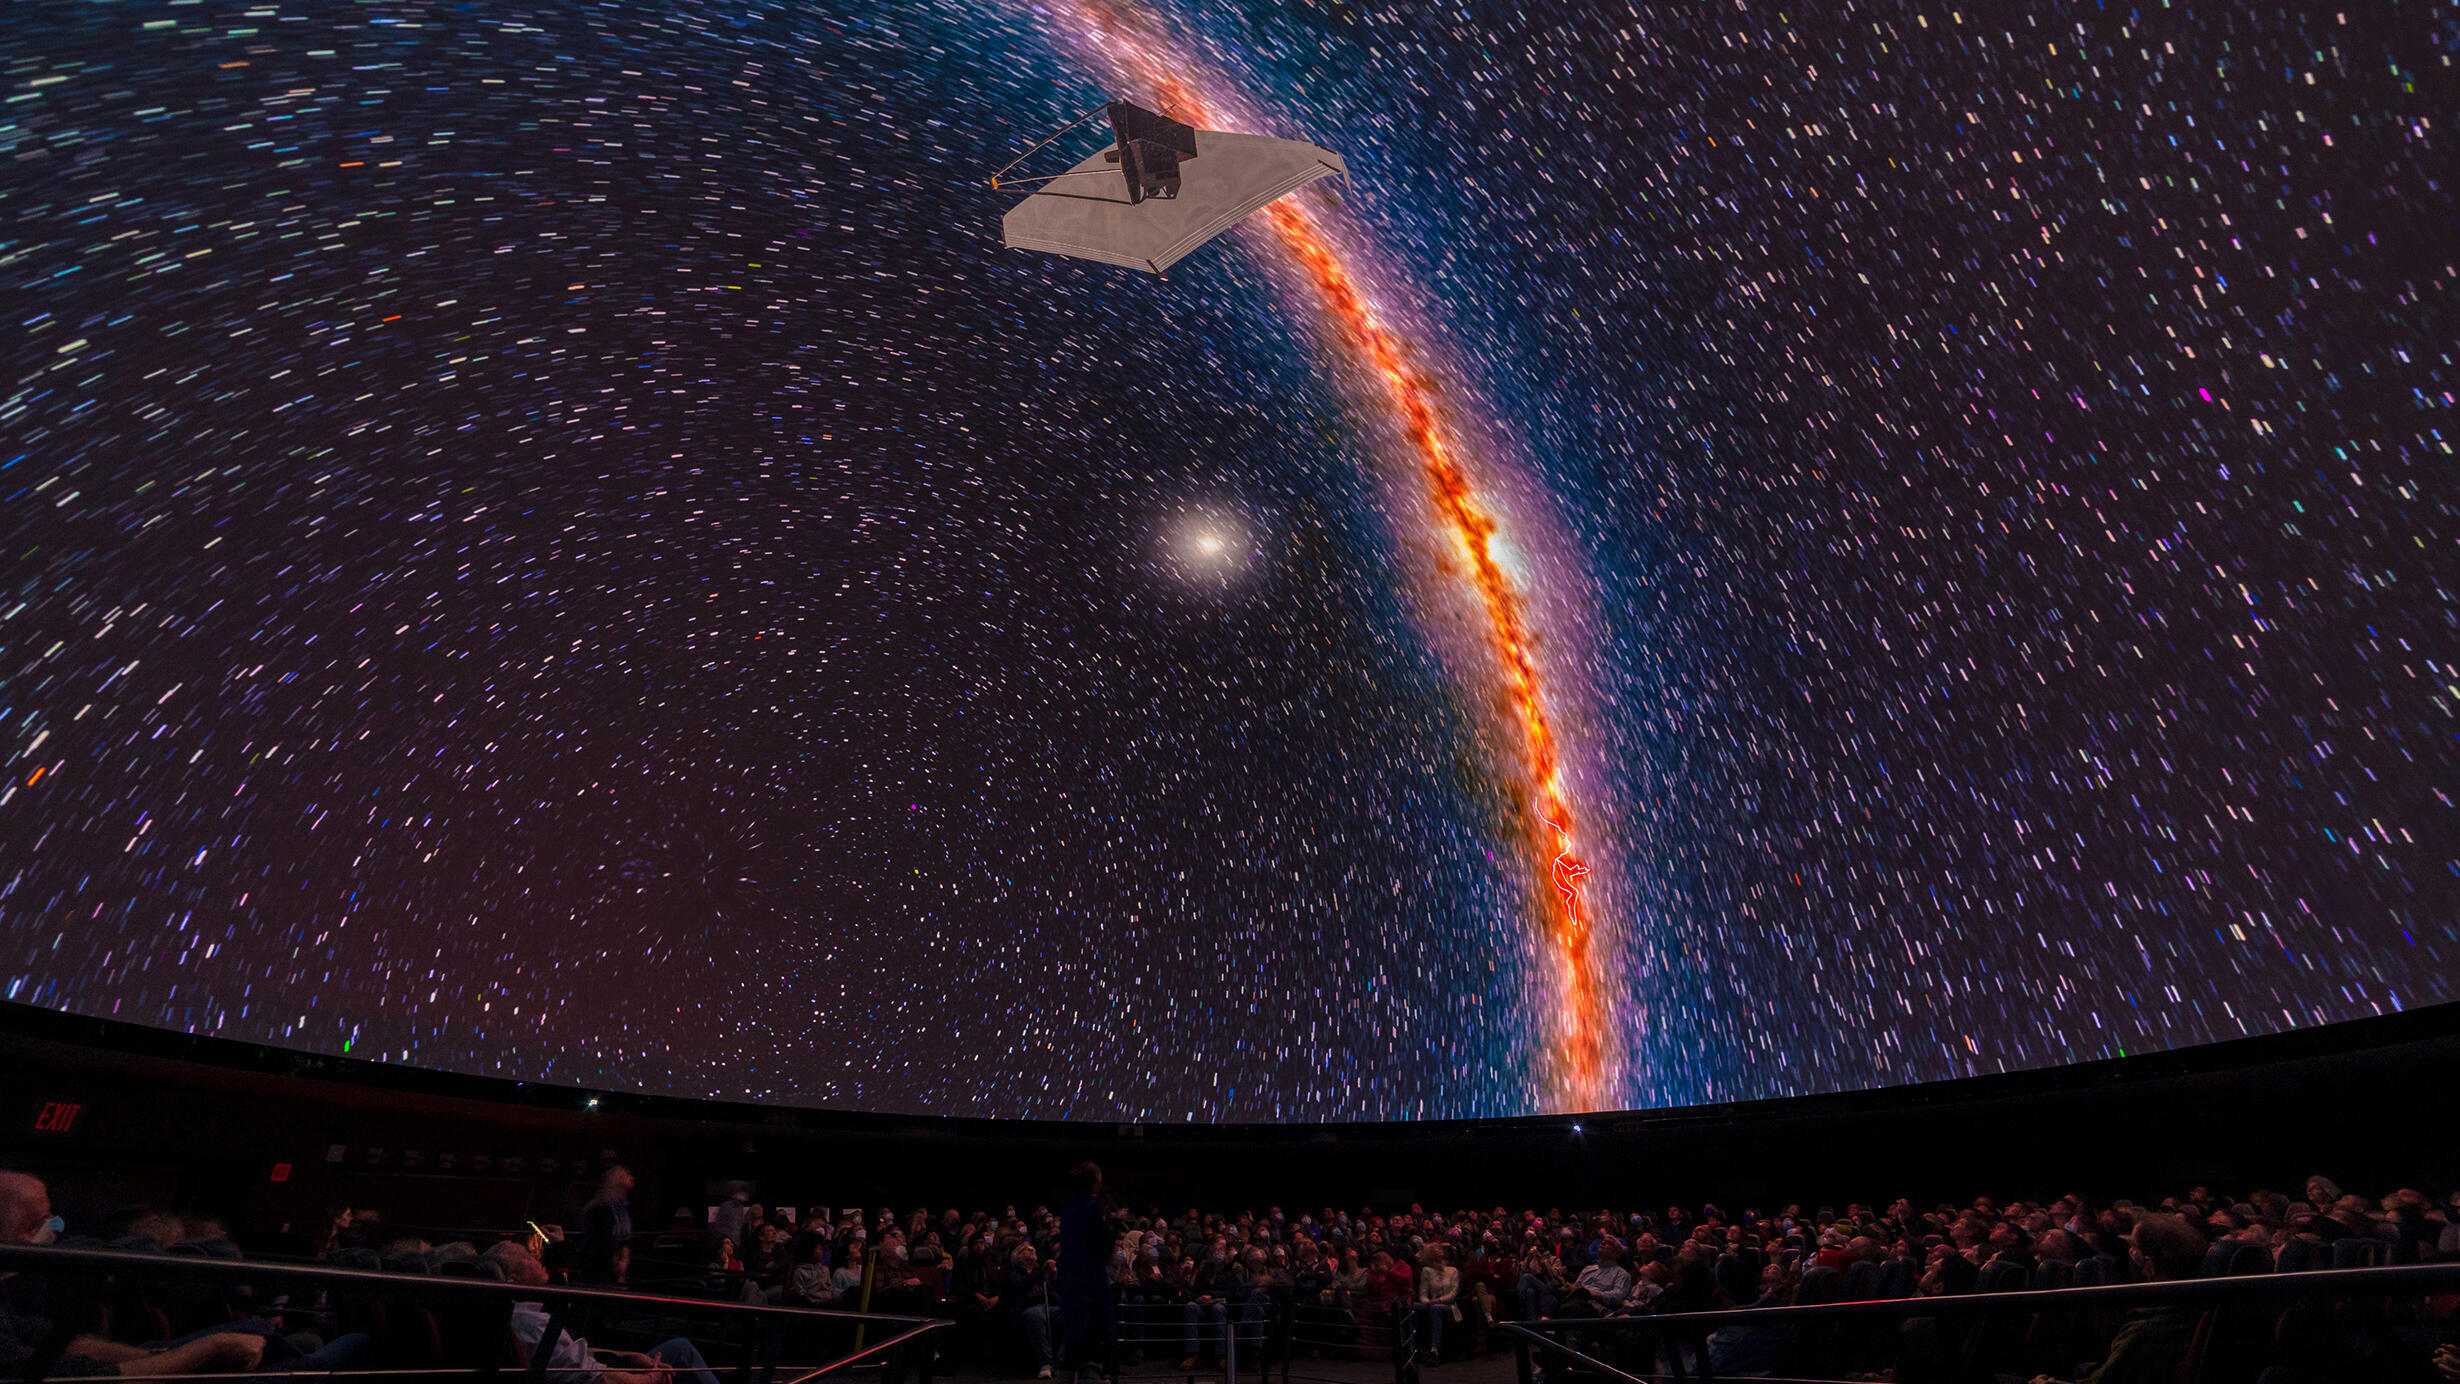 A wide-angle photograph of an audience inside the Hayden Planetarium, looking up at a depiction of a spacecraft against a backdrop of white stars.